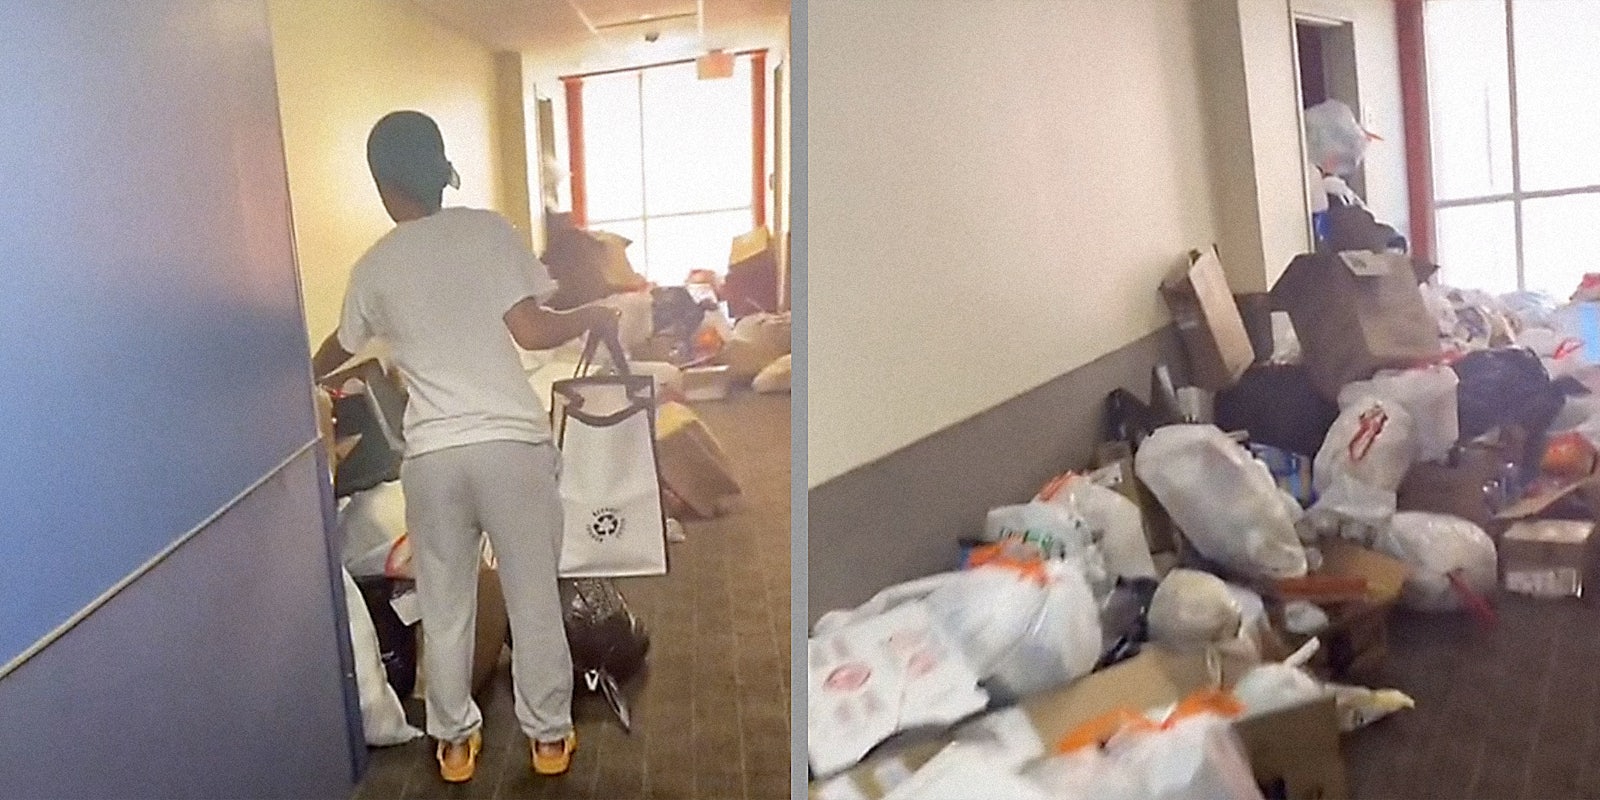 A woman in a hallway (L) and trash piled up in a hallway (R).